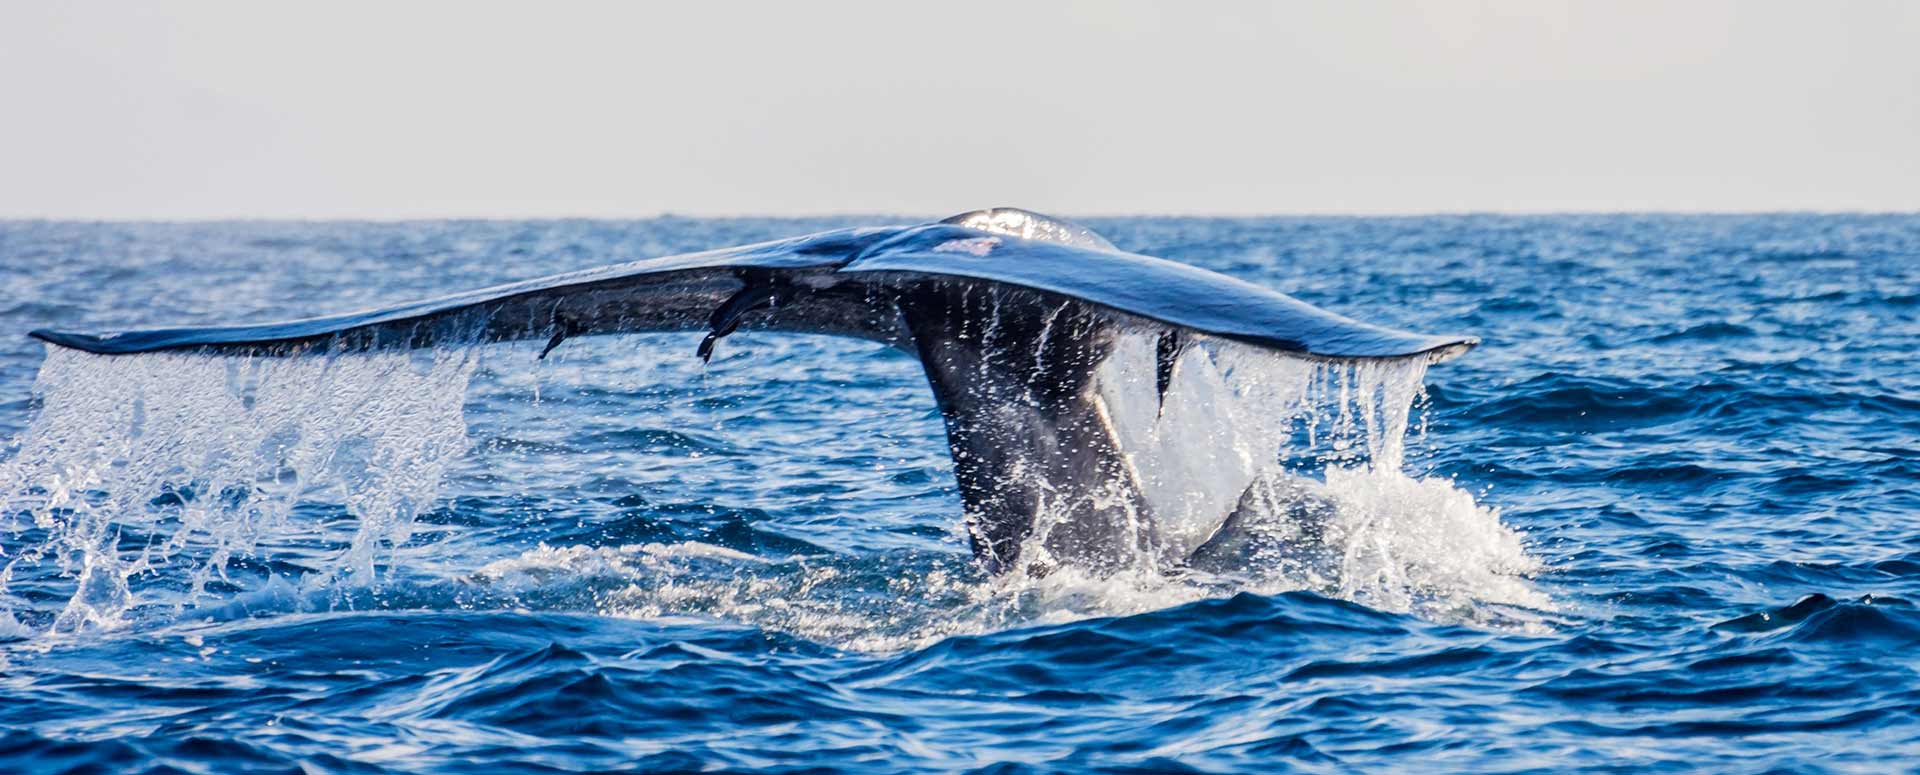 Tale of a majestic blue whale above the sea level in Mirissa